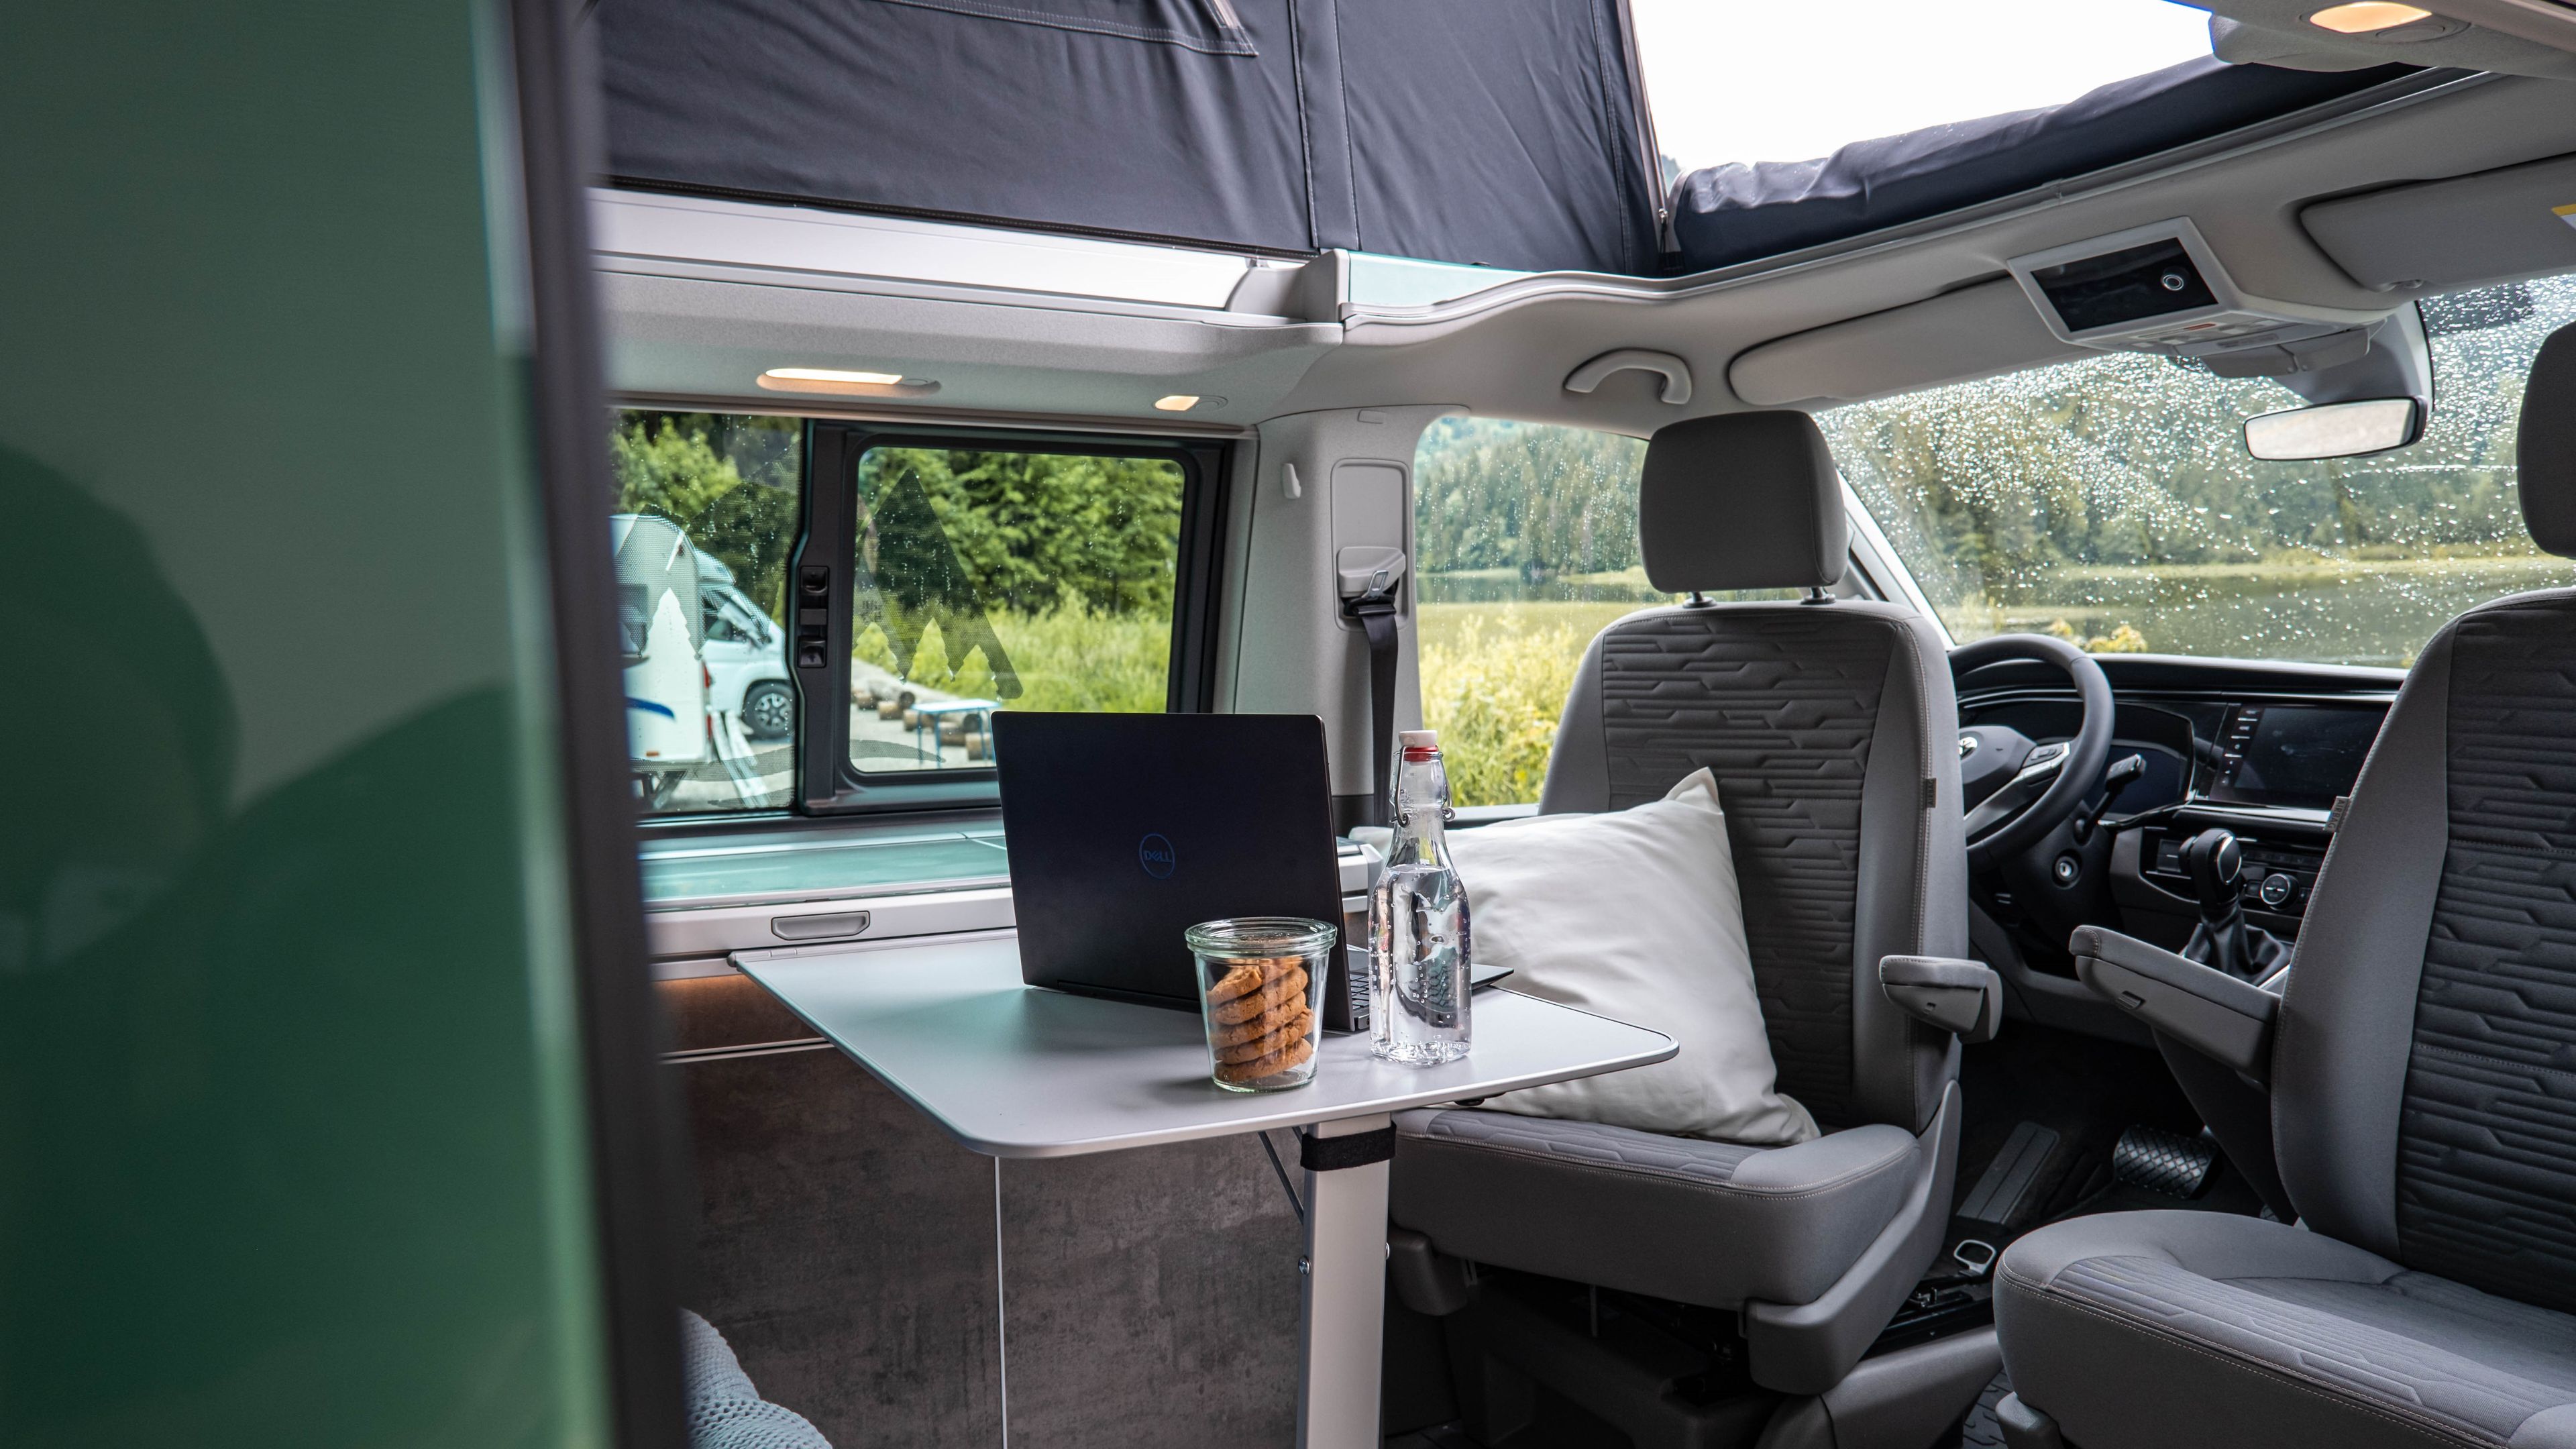 Working with a laptop in a camper van (VW Bulli): Plenty of space & comfort